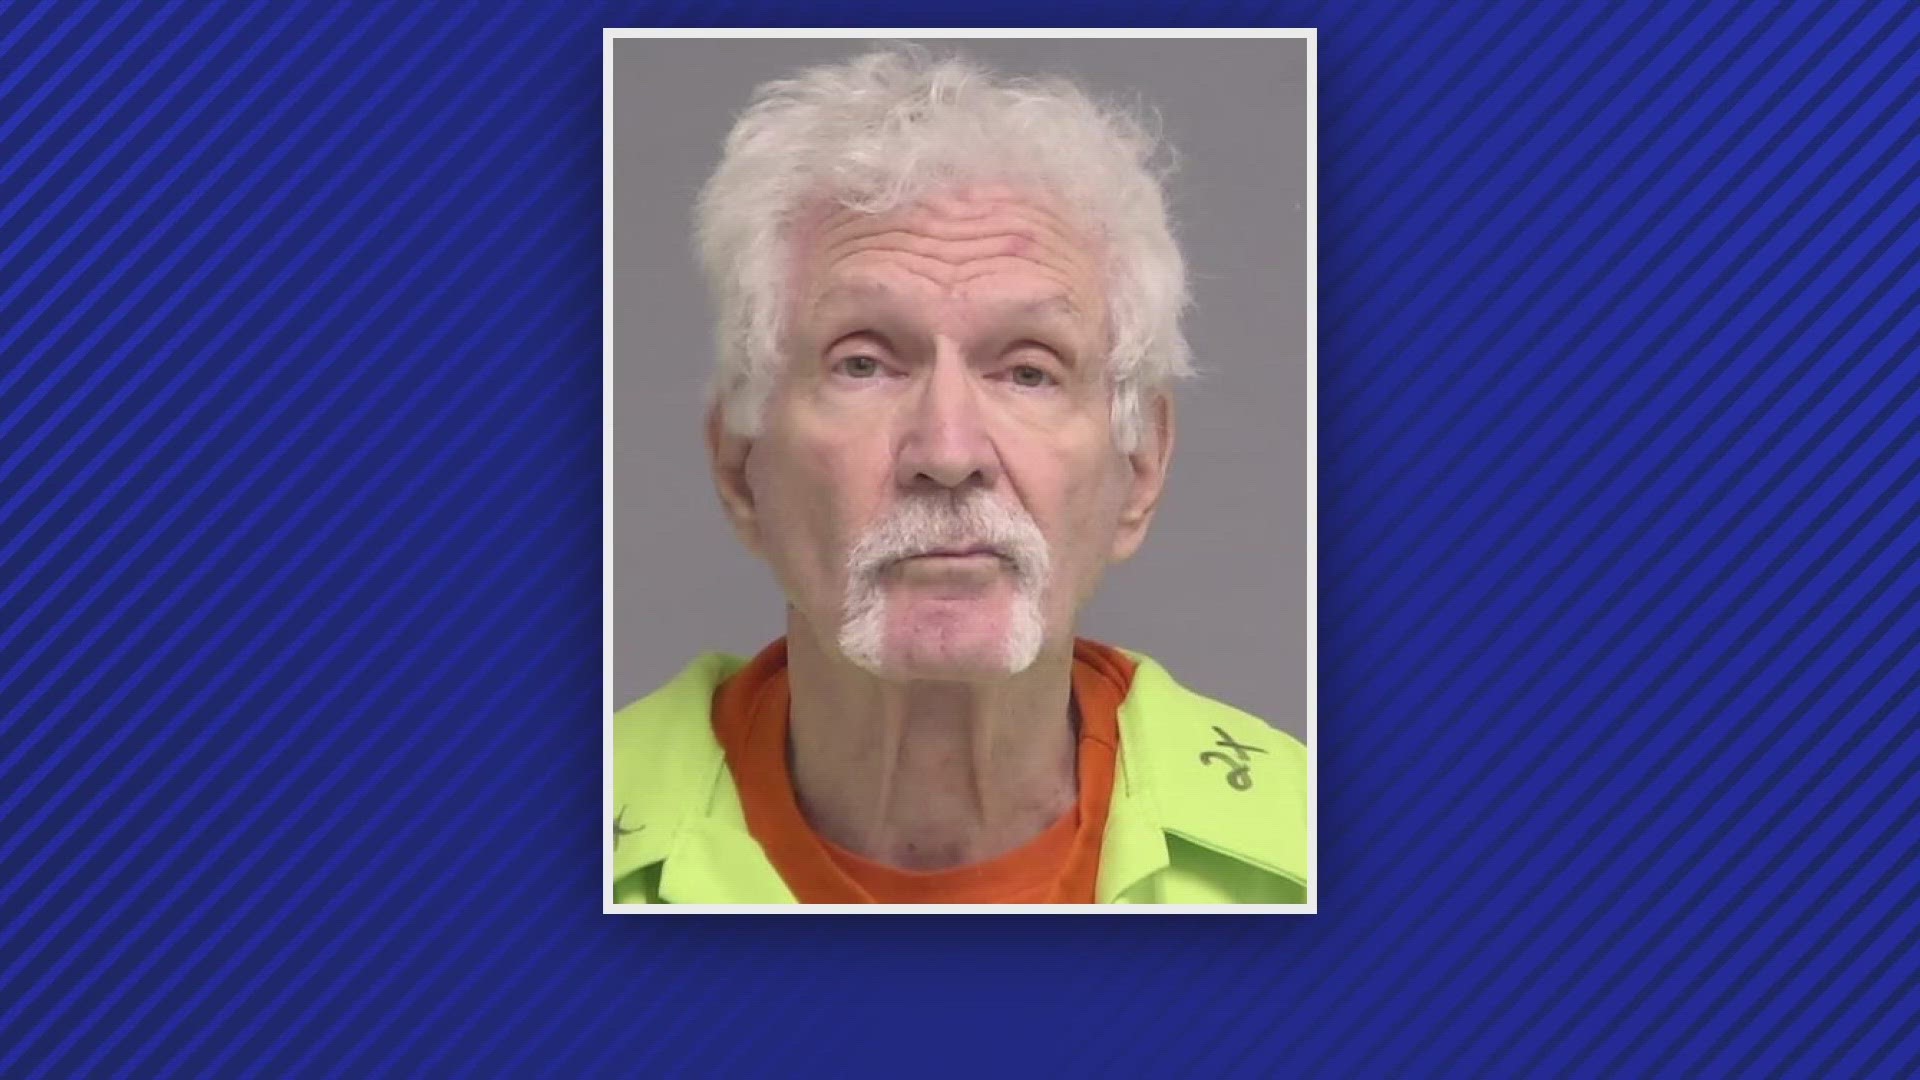 Dennis McCabe, 76, faces a felony attempted murder charge, his arrest report states.